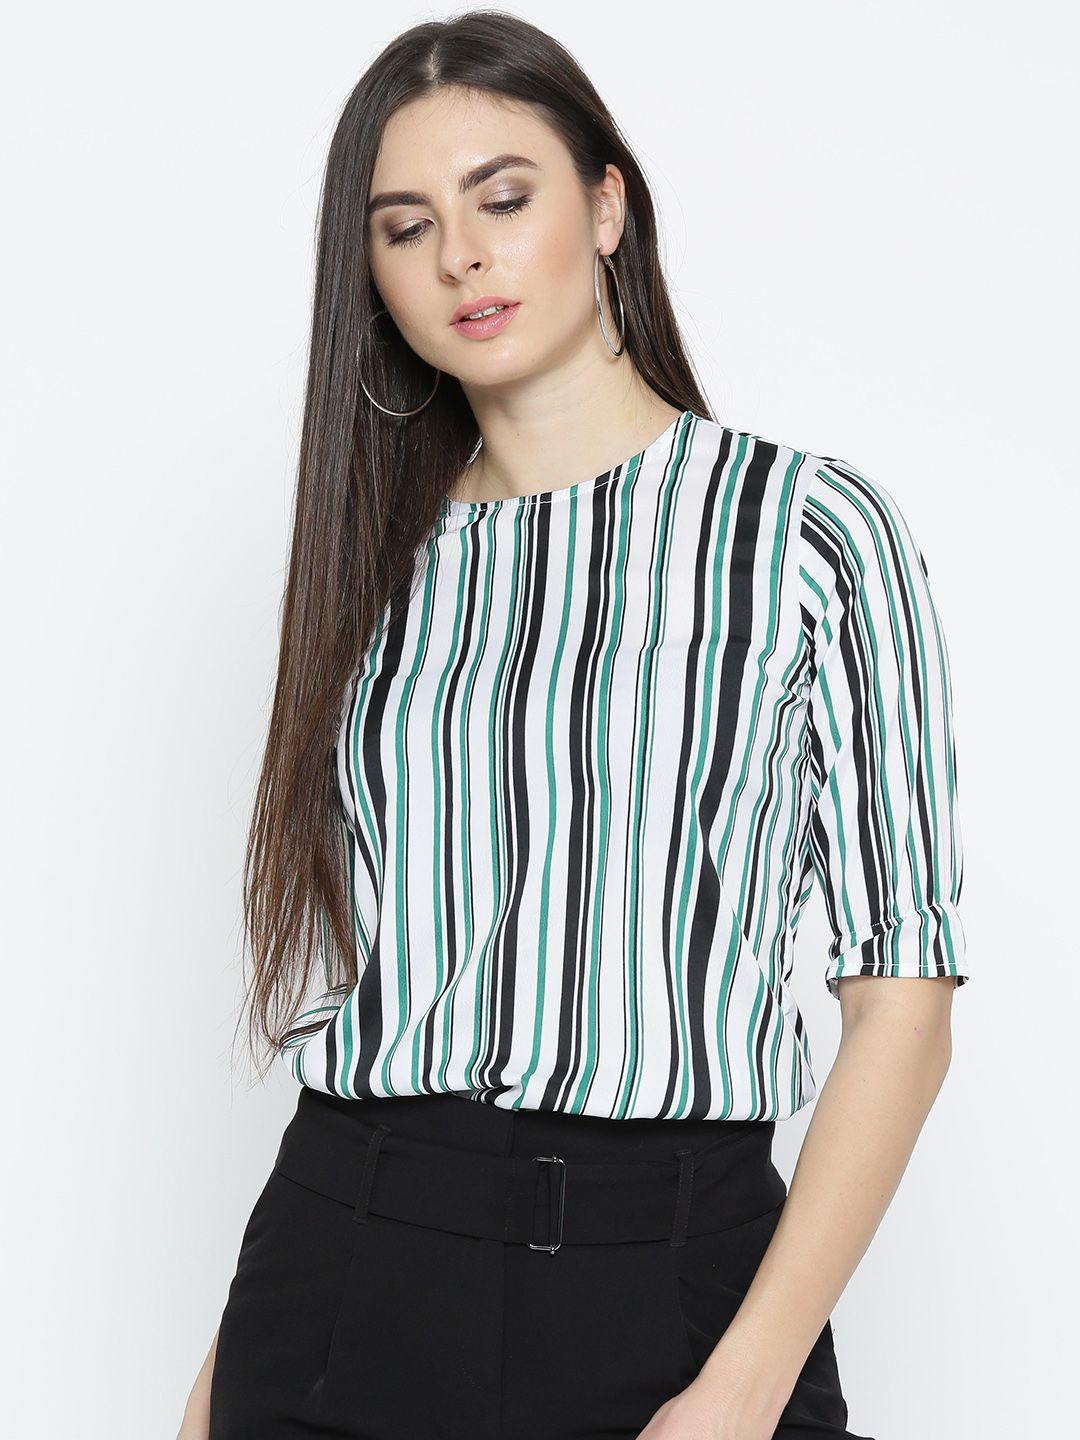 style-quotient-white-&-green-candy-striped-top